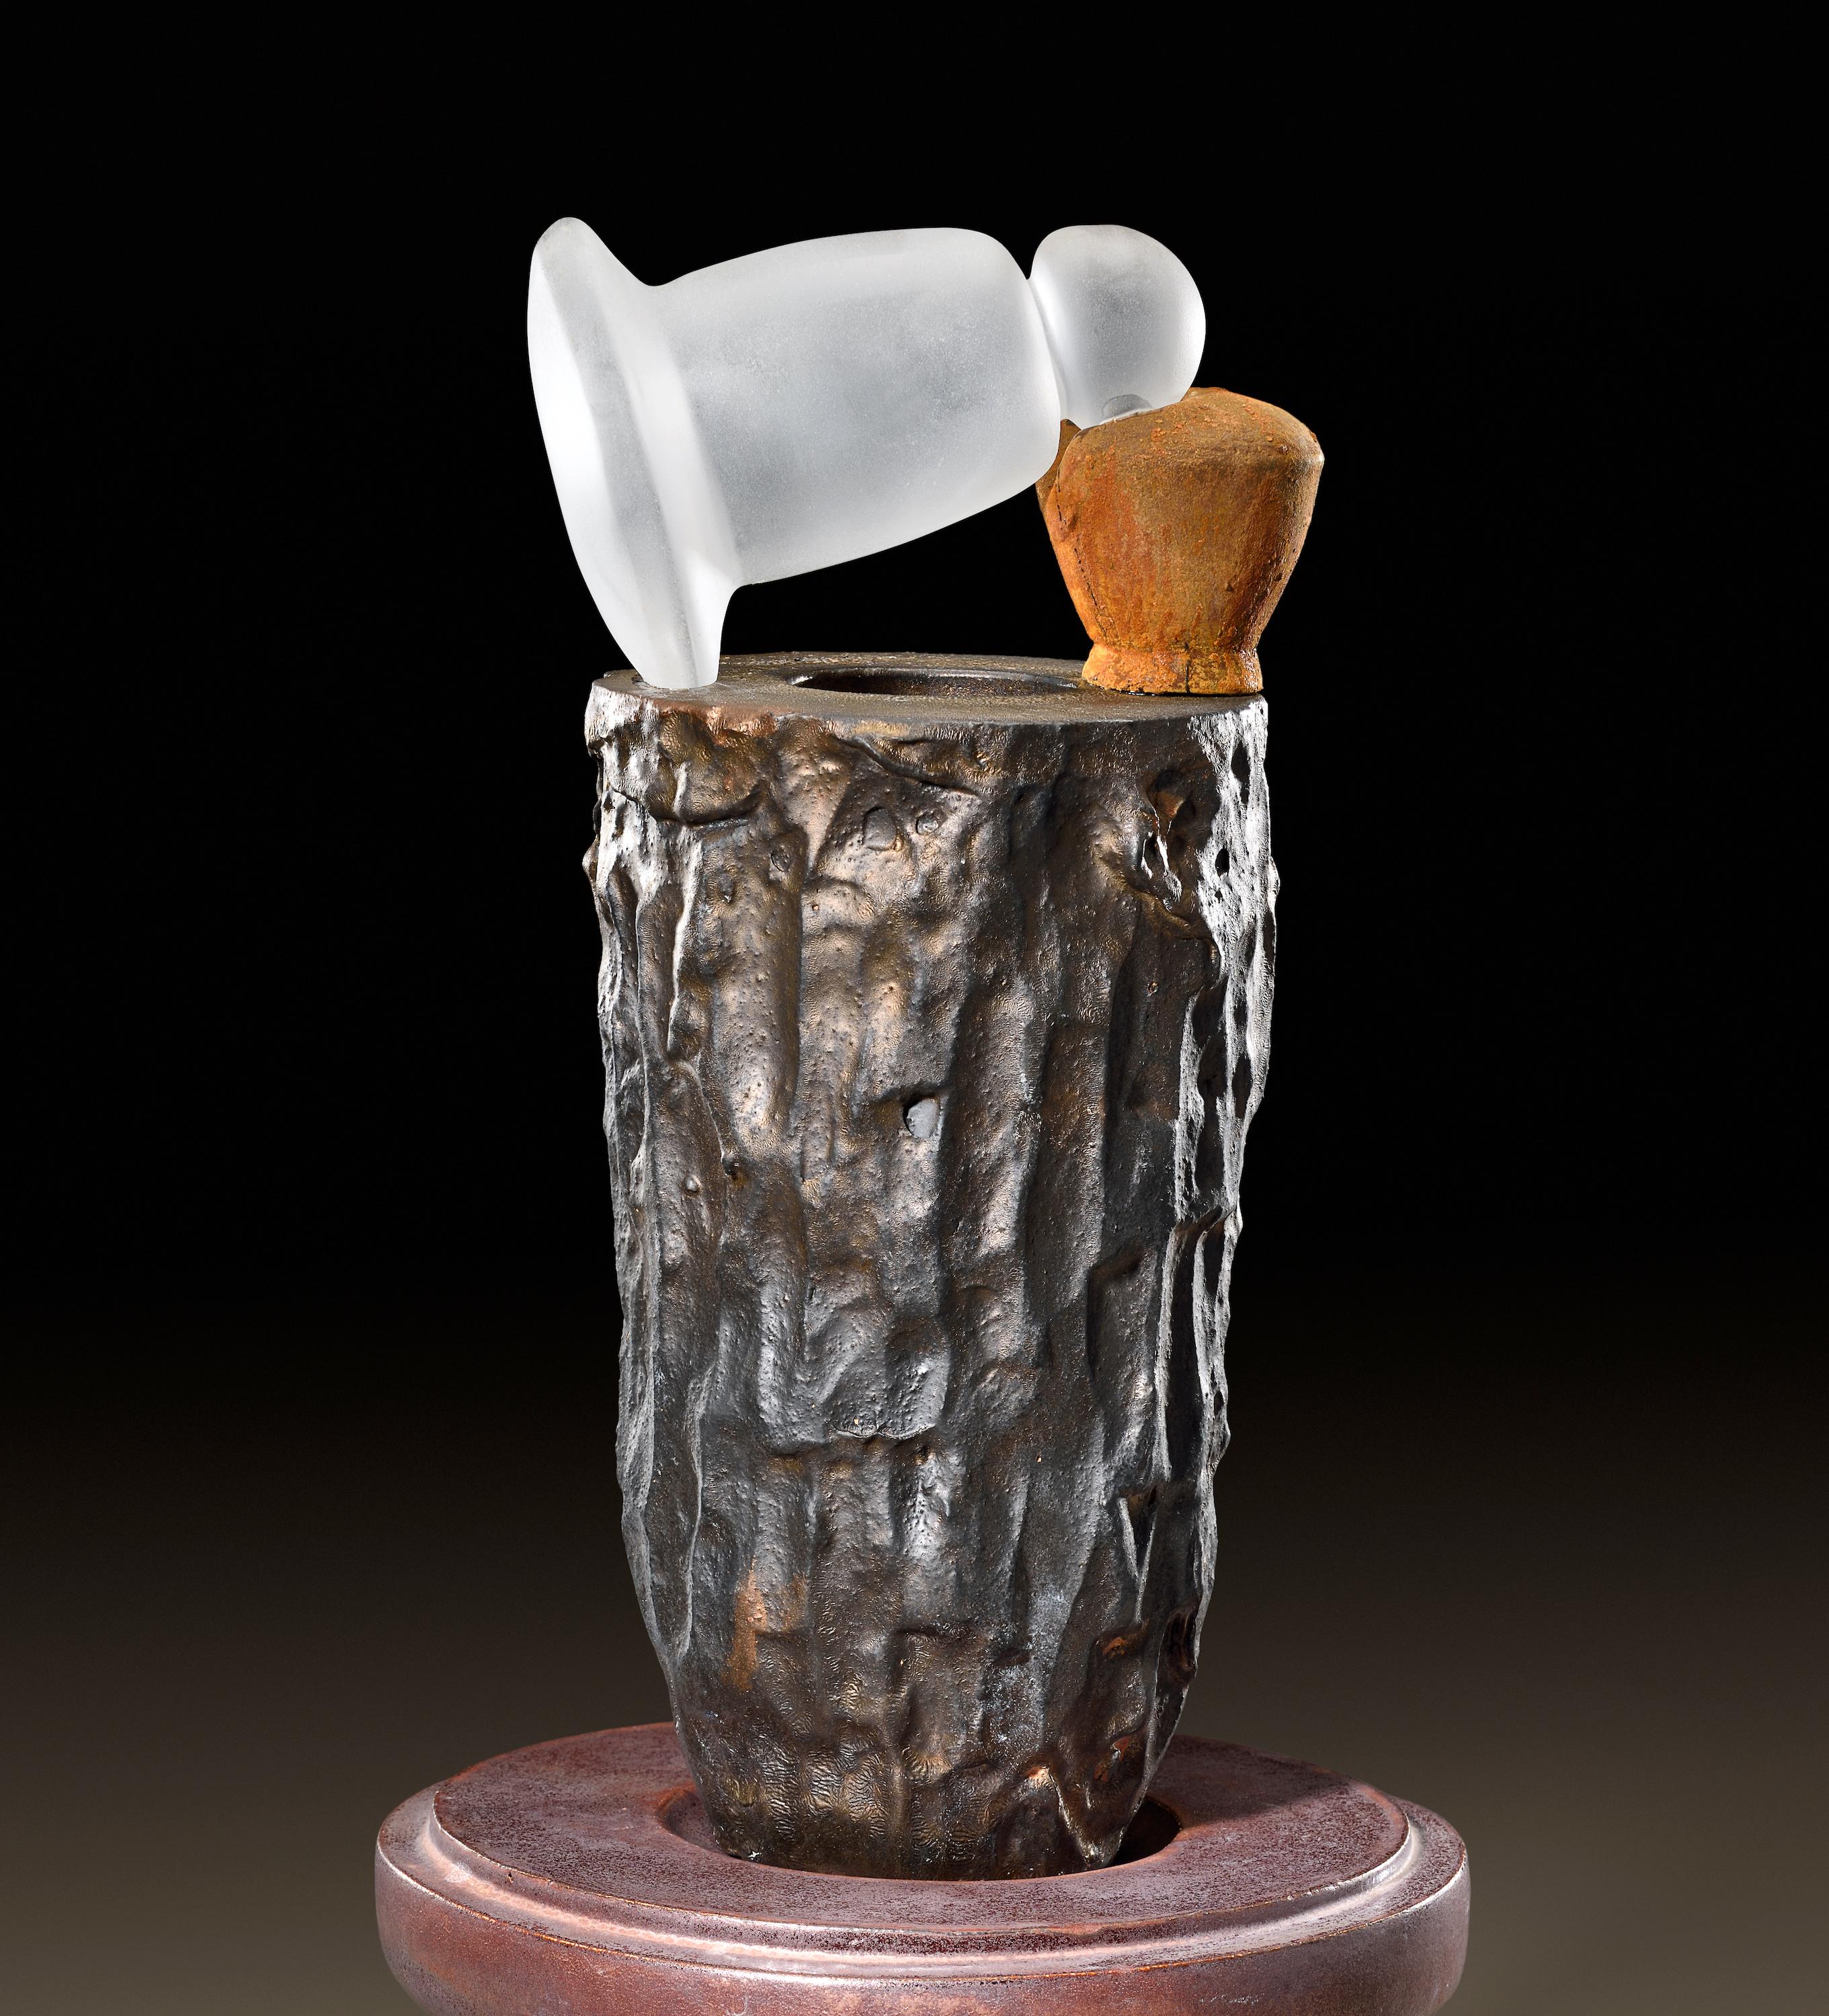 Richard Hirsch Glazed Ceramic Crucible Sculpture #51, 2018 In Excellent Condition For Sale In New York, NY